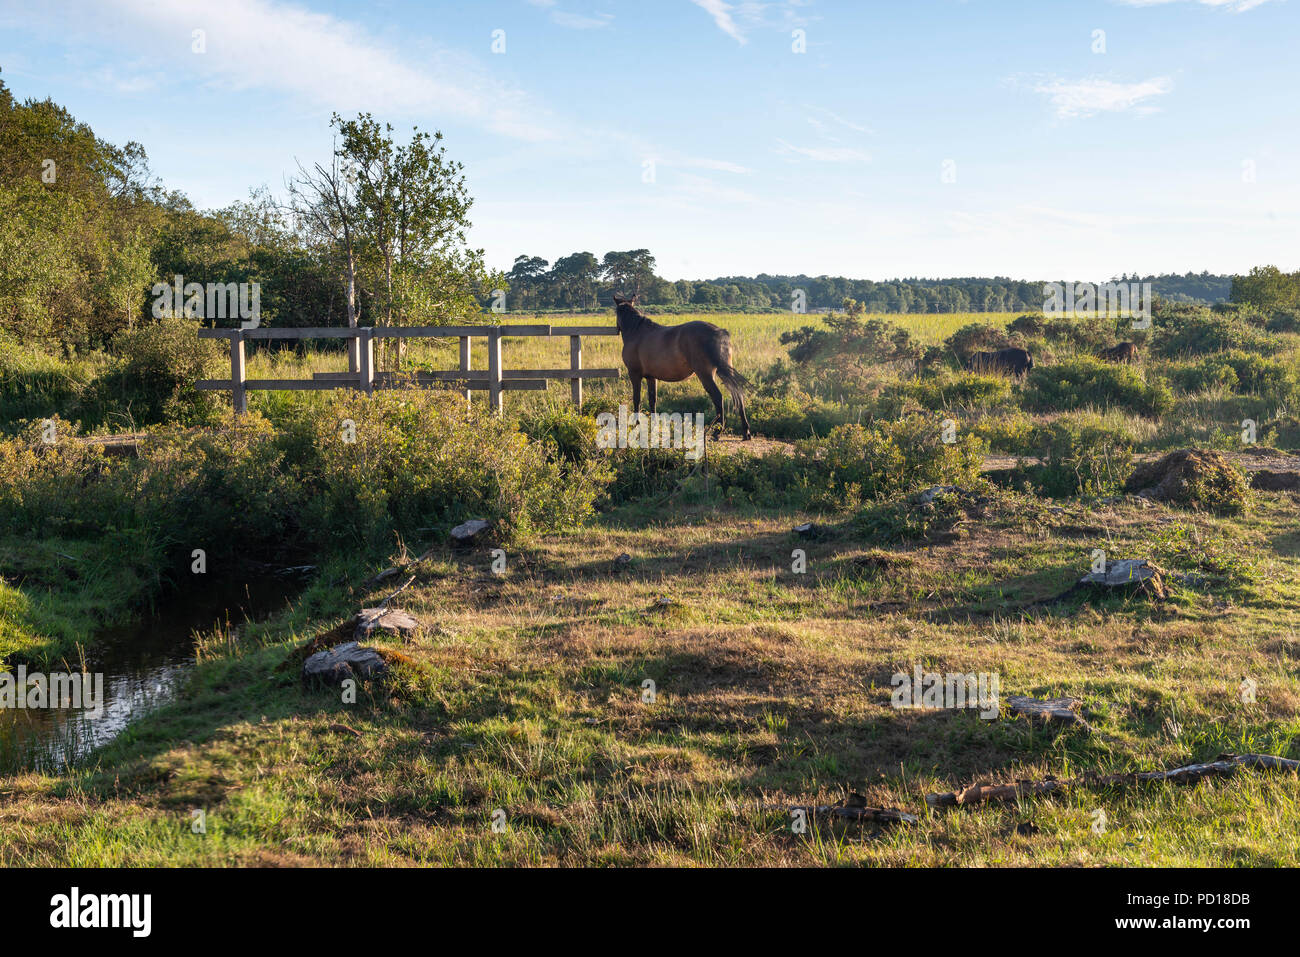 Wild ponies of the New Forest National Park graze on the lush summer grass on a warm early evening. Near Brockenhurst, Hampshire, UK Stock Photo